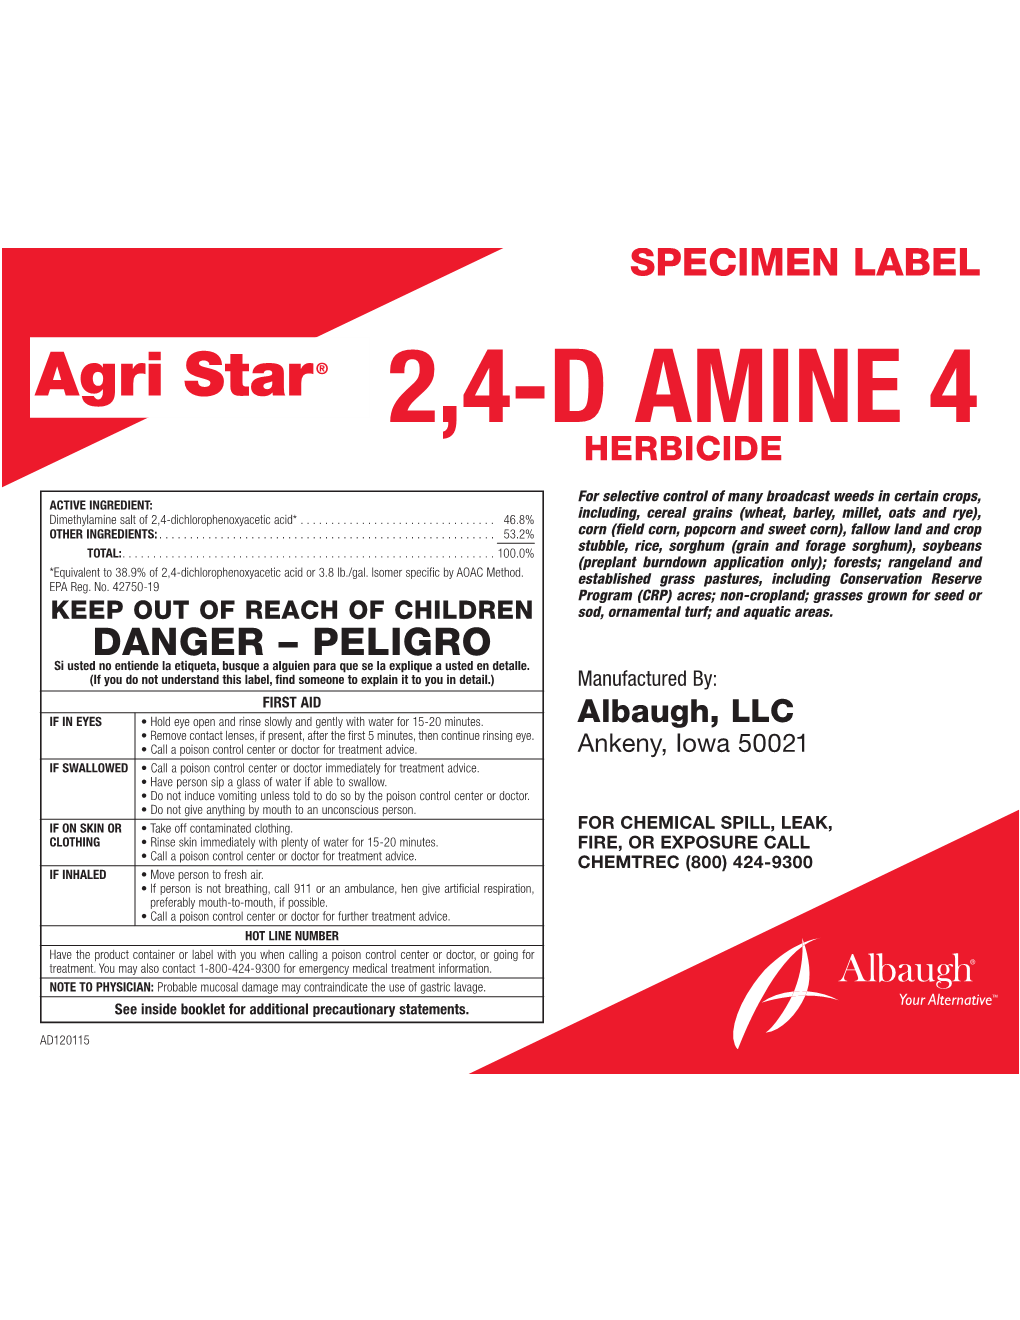 2,4-D Amine 4 Herbicide